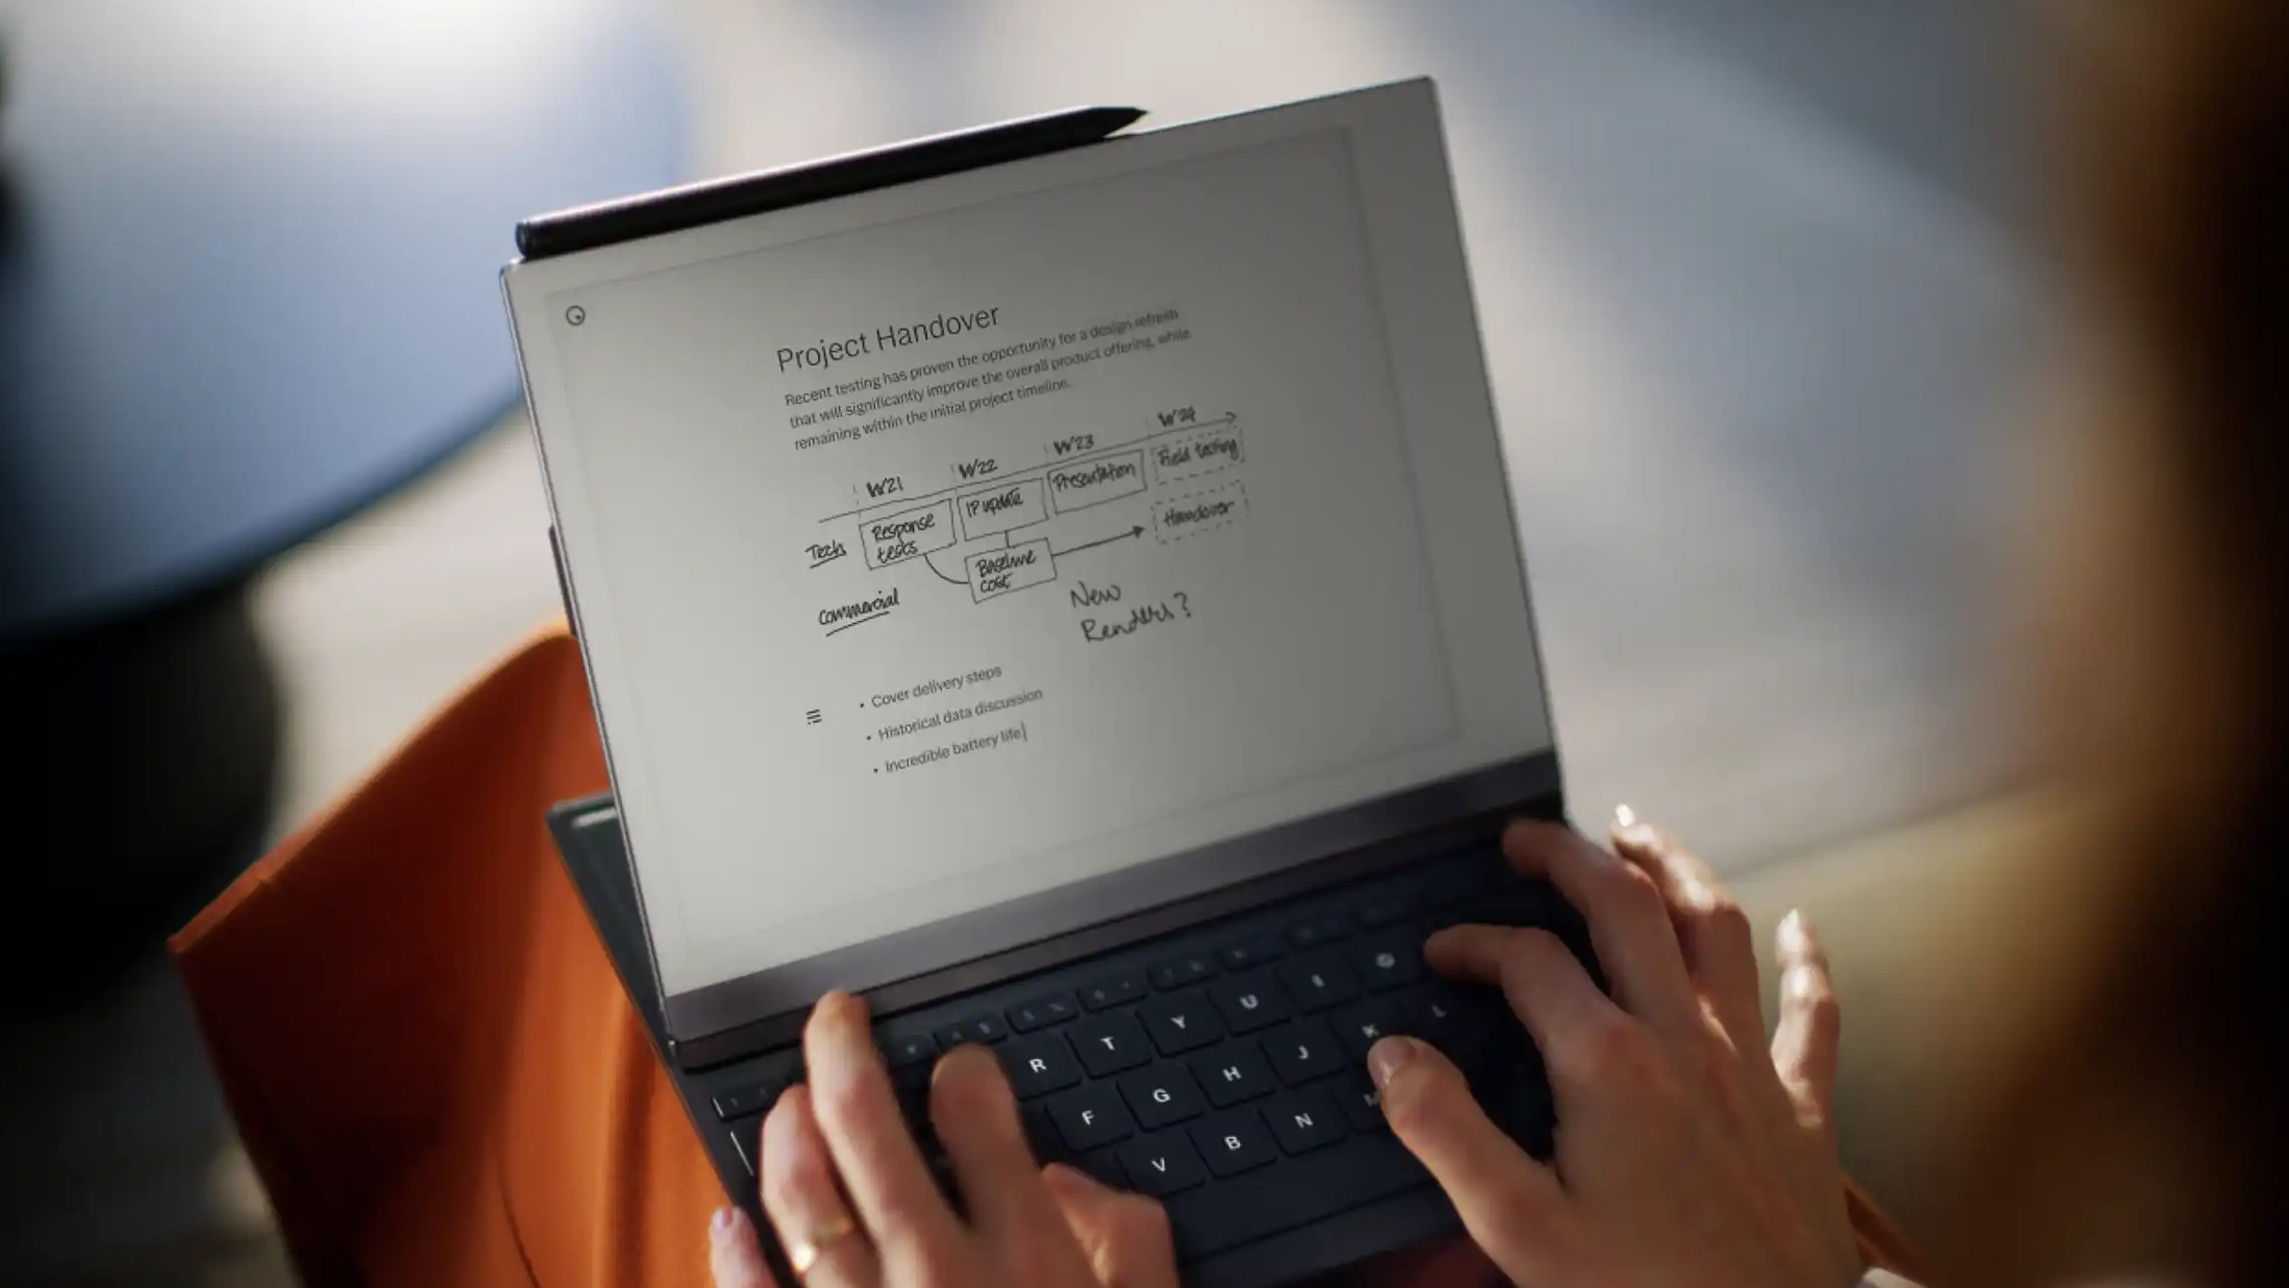 Hands typing on the new ReMarkable 2 tablet keyboard